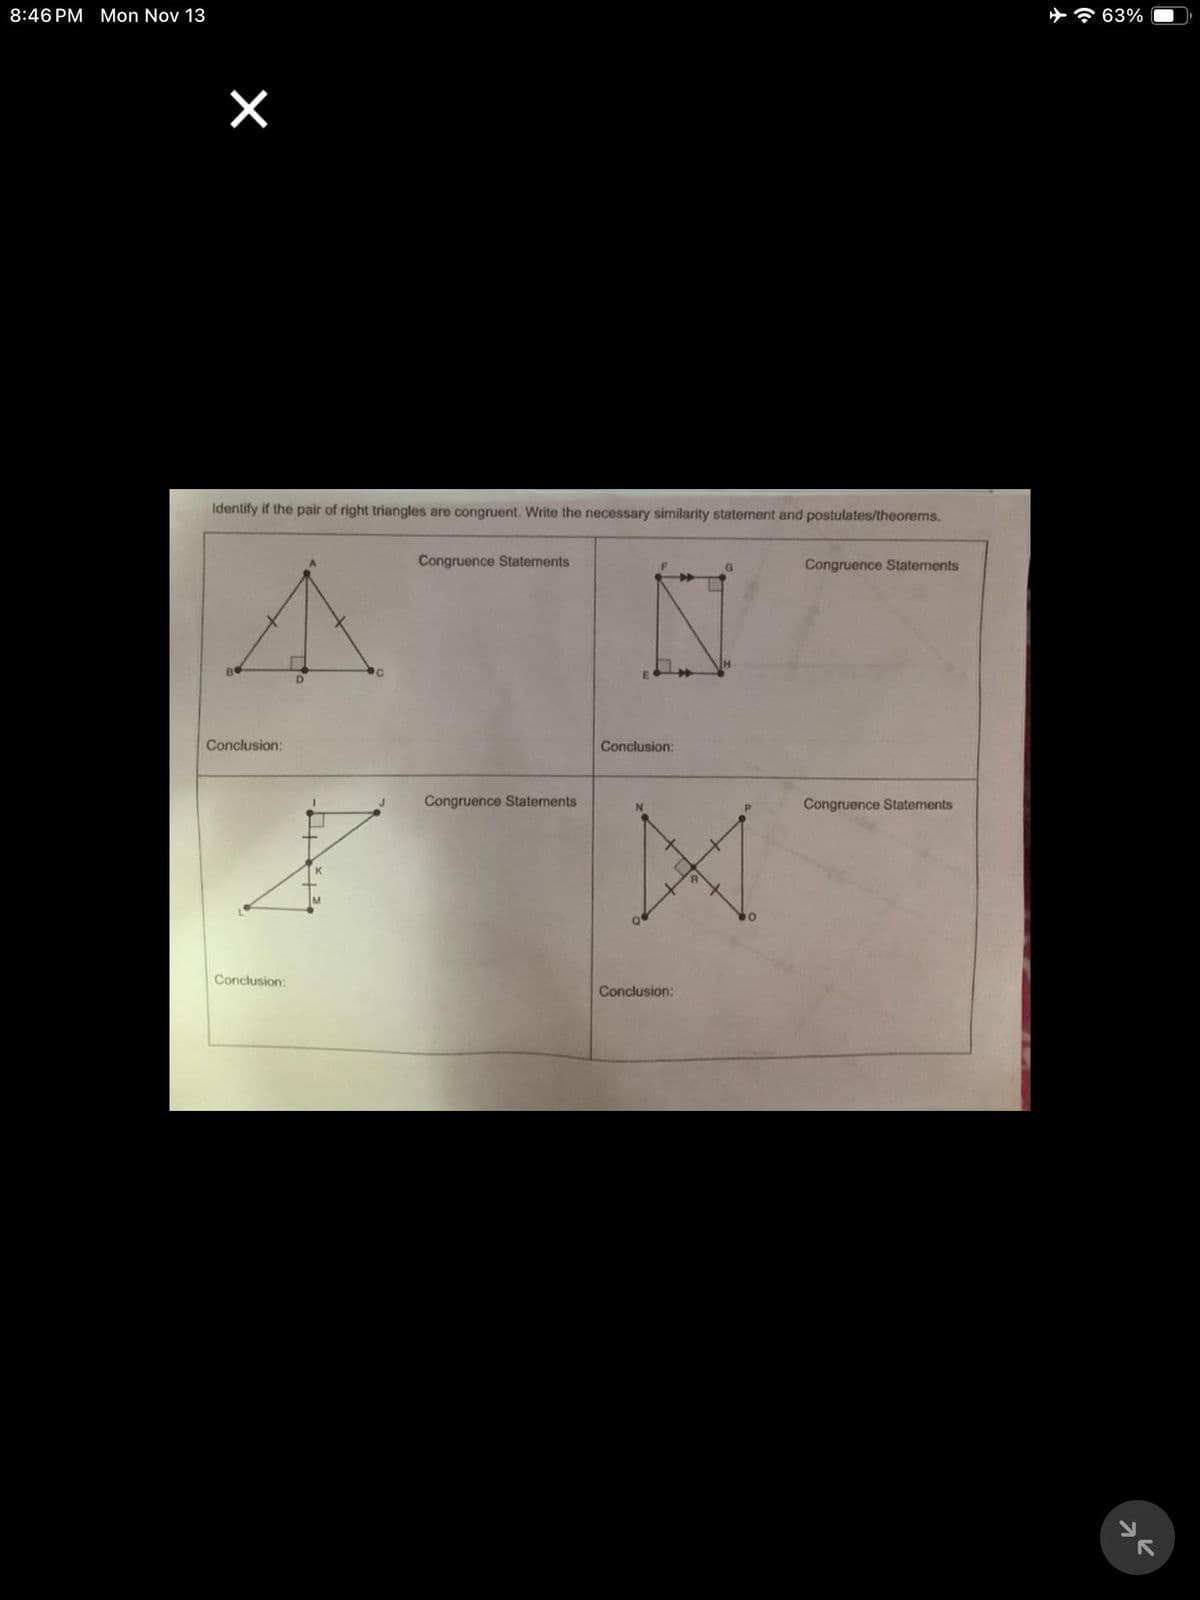 8:46 PM Mon Nov 13
Identify if the pair of right triangles are congruent. Write the necessary similarity statement and postulates/theorems.
A
Conclusion:
A
Conclusion:
Congruence Statements
Congruence Statements
G
N
Conclusion:
N
M
Conclusion:
Congruence Statements
Congruence Statements
63%